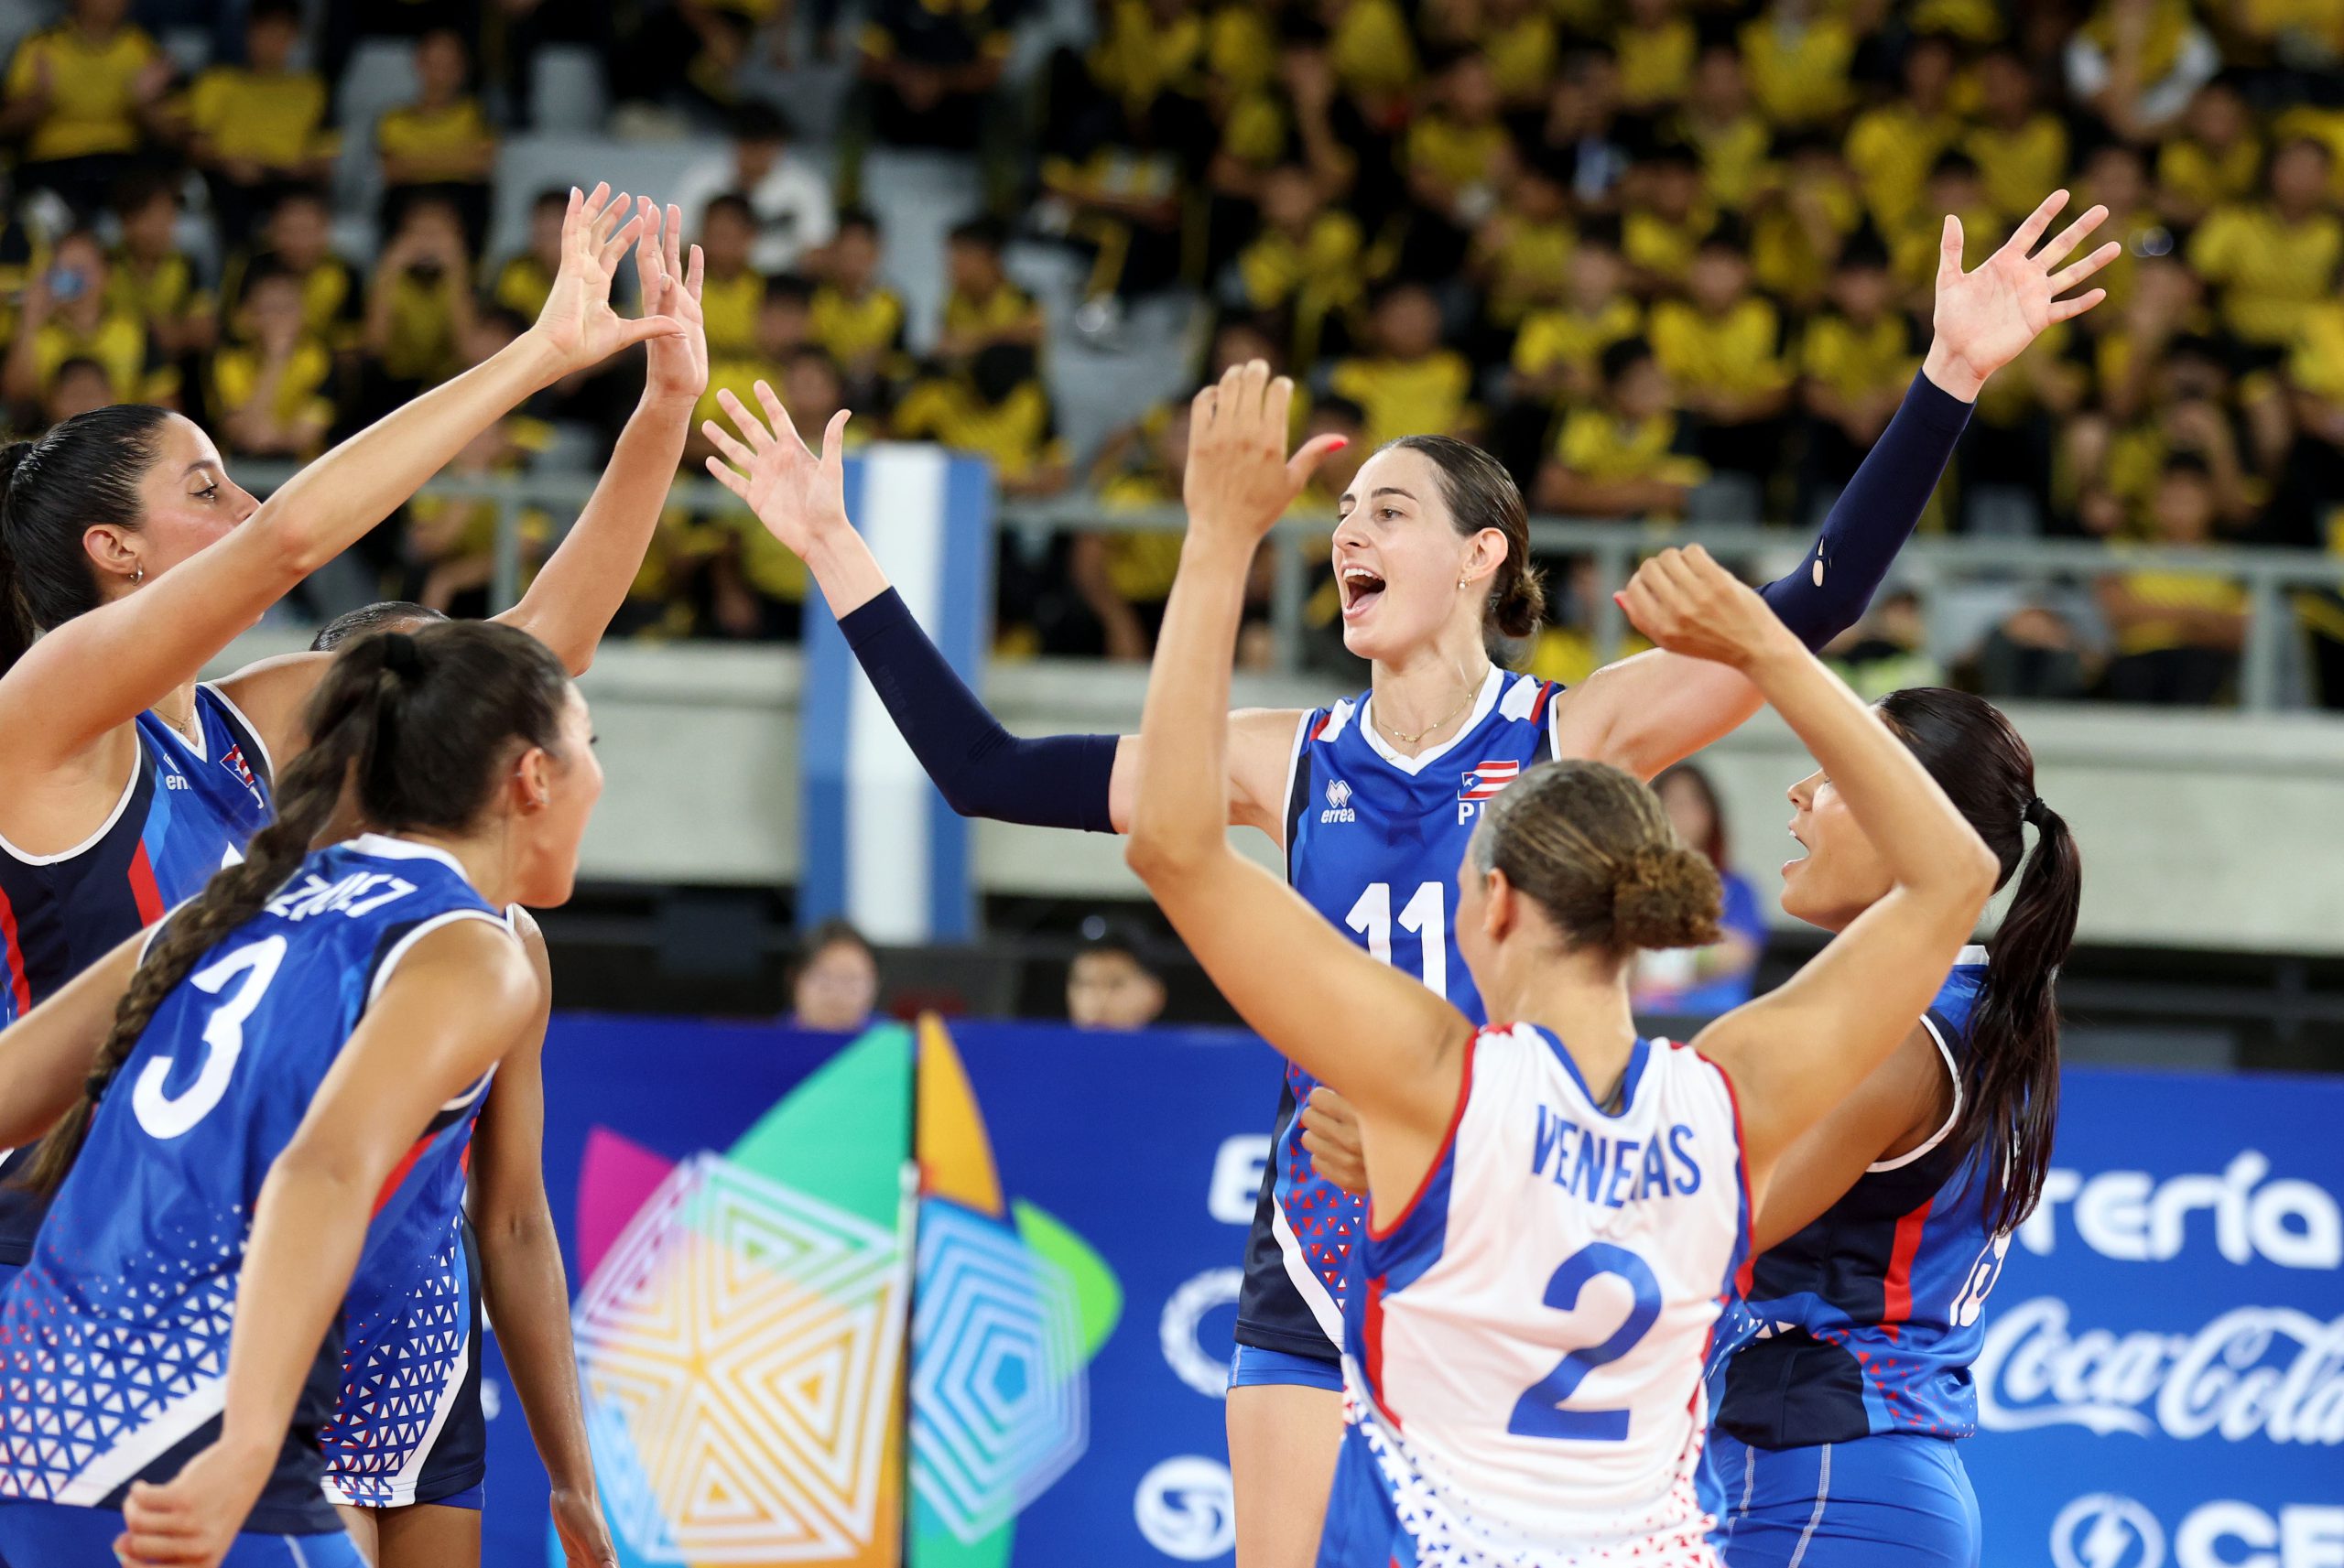 Women’s Volleyball opens with Puerto Rico defeating Mexico